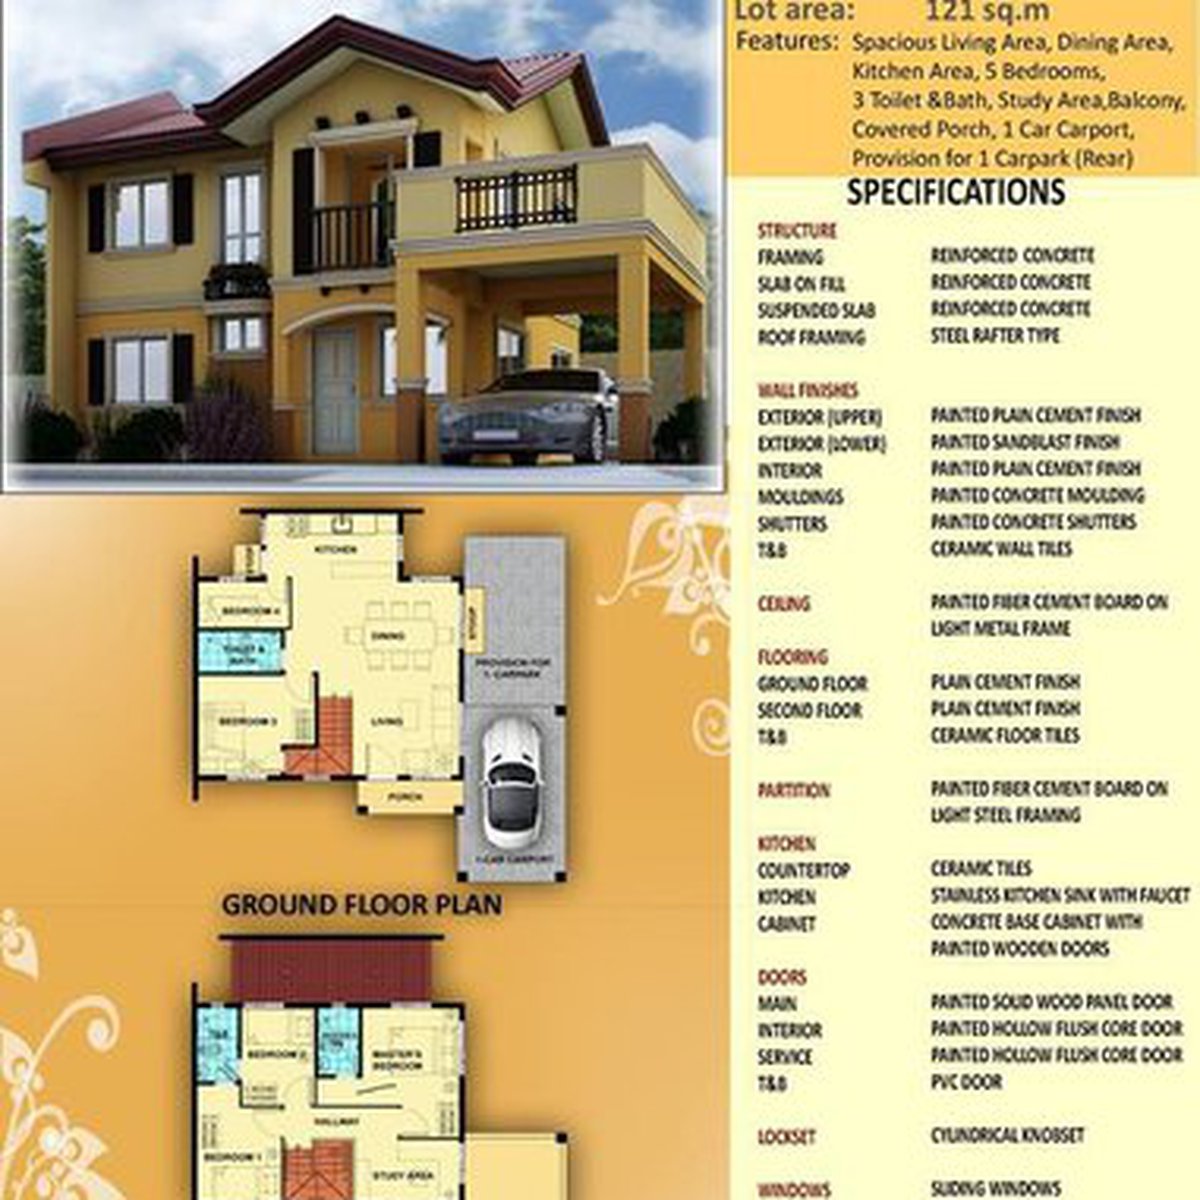 Camella Fatima House Model House And Lot For Sale.SqGR4tLhffkPXkZq7 